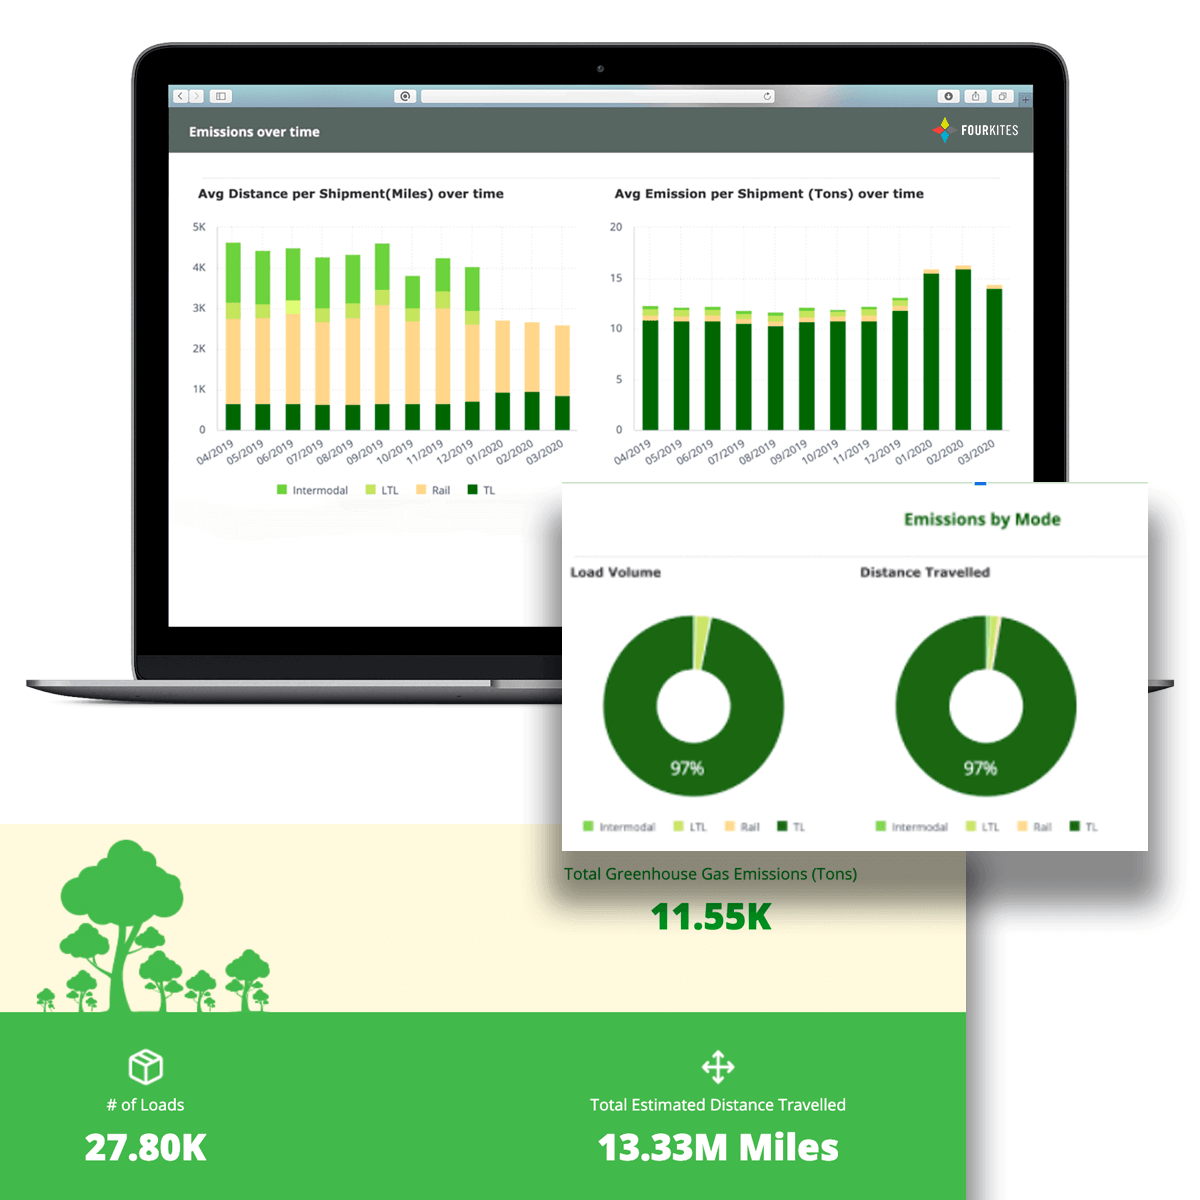 Fourkites Sustainability Dashboard for carbon emissions data